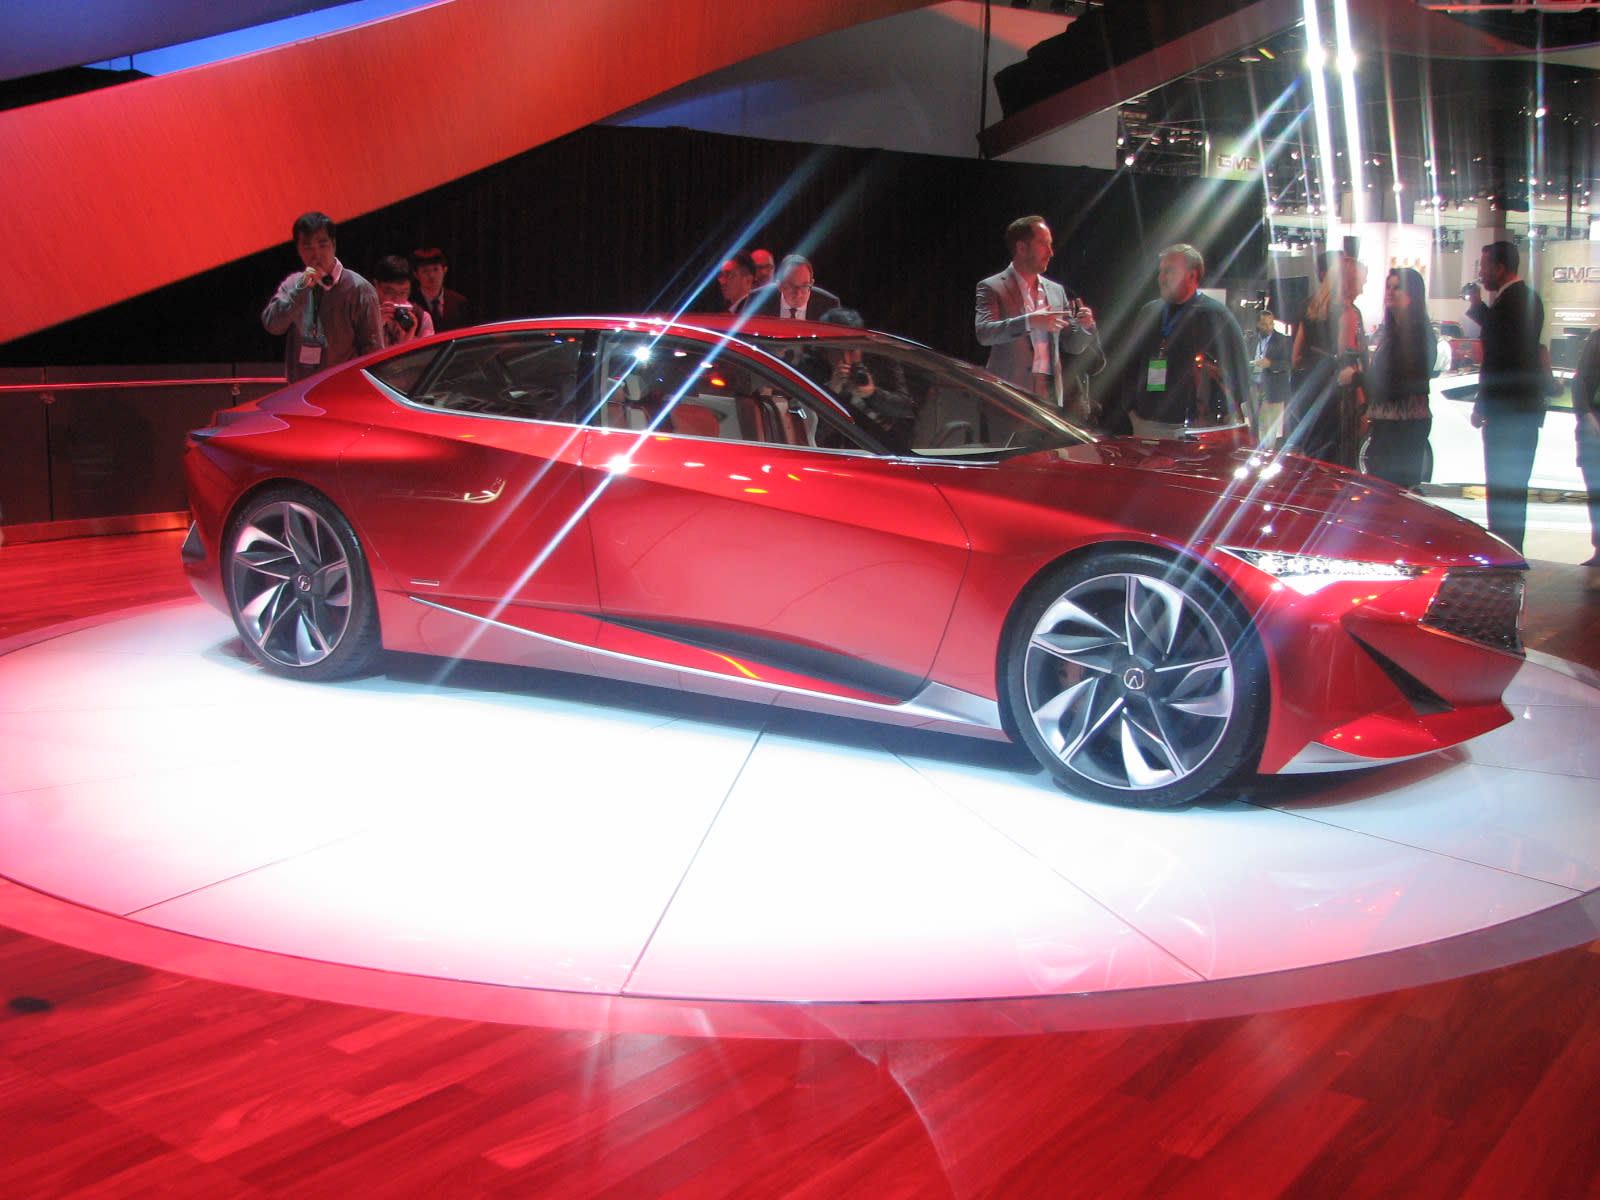 The most amazing cars we saw at the 2016 Detroit Auto Show